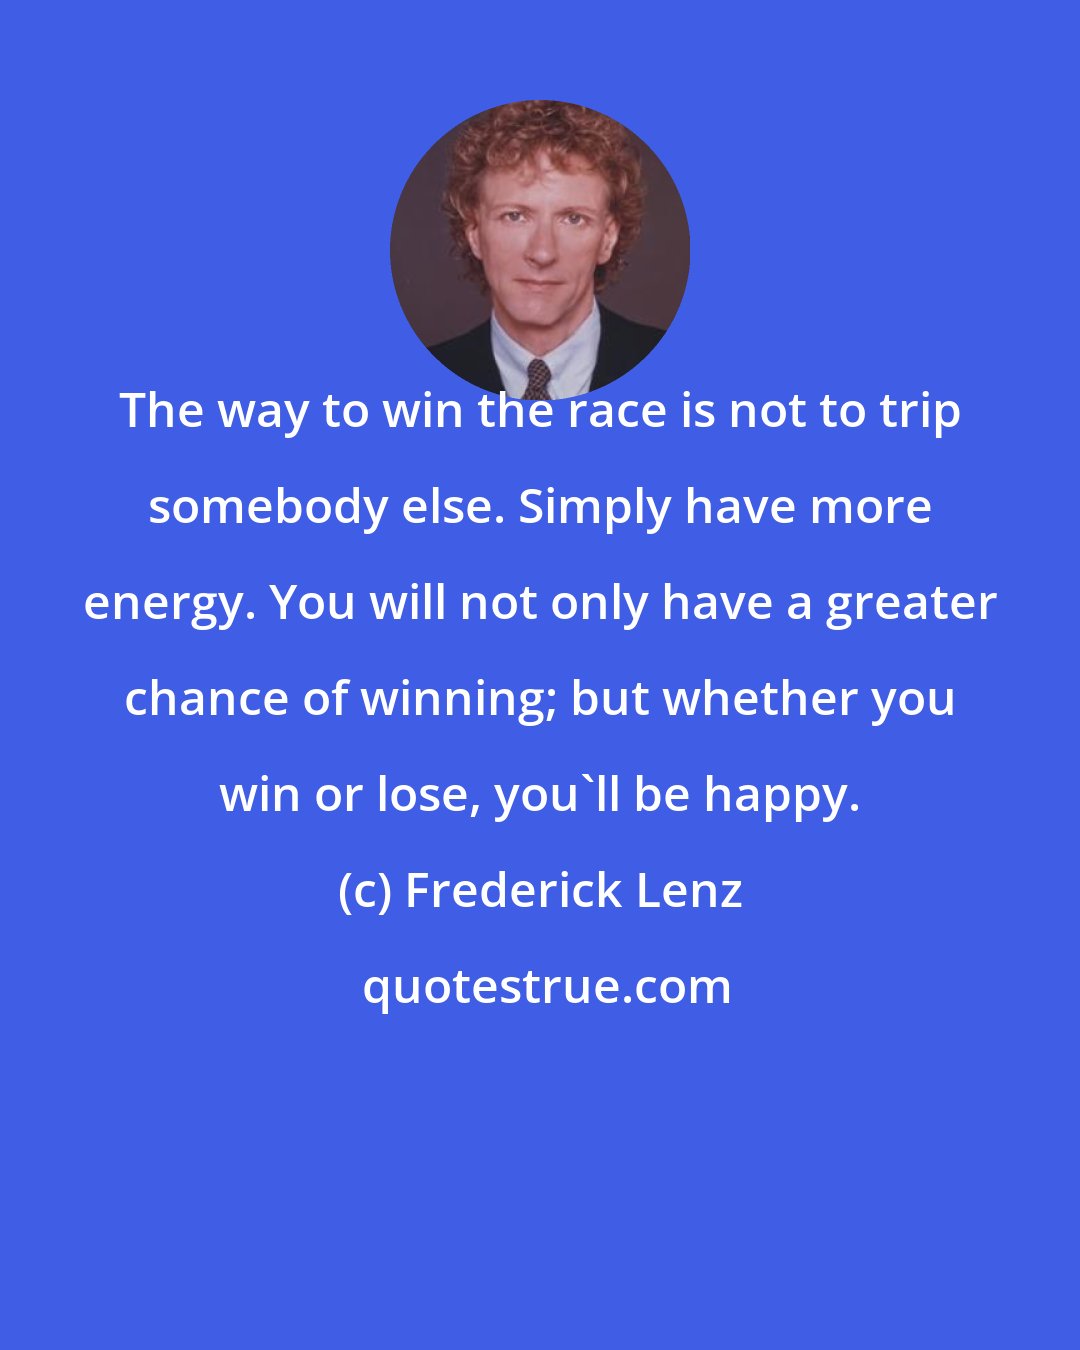 Frederick Lenz: The way to win the race is not to trip somebody else. Simply have more energy. You will not only have a greater chance of winning; but whether you win or lose, you'll be happy.